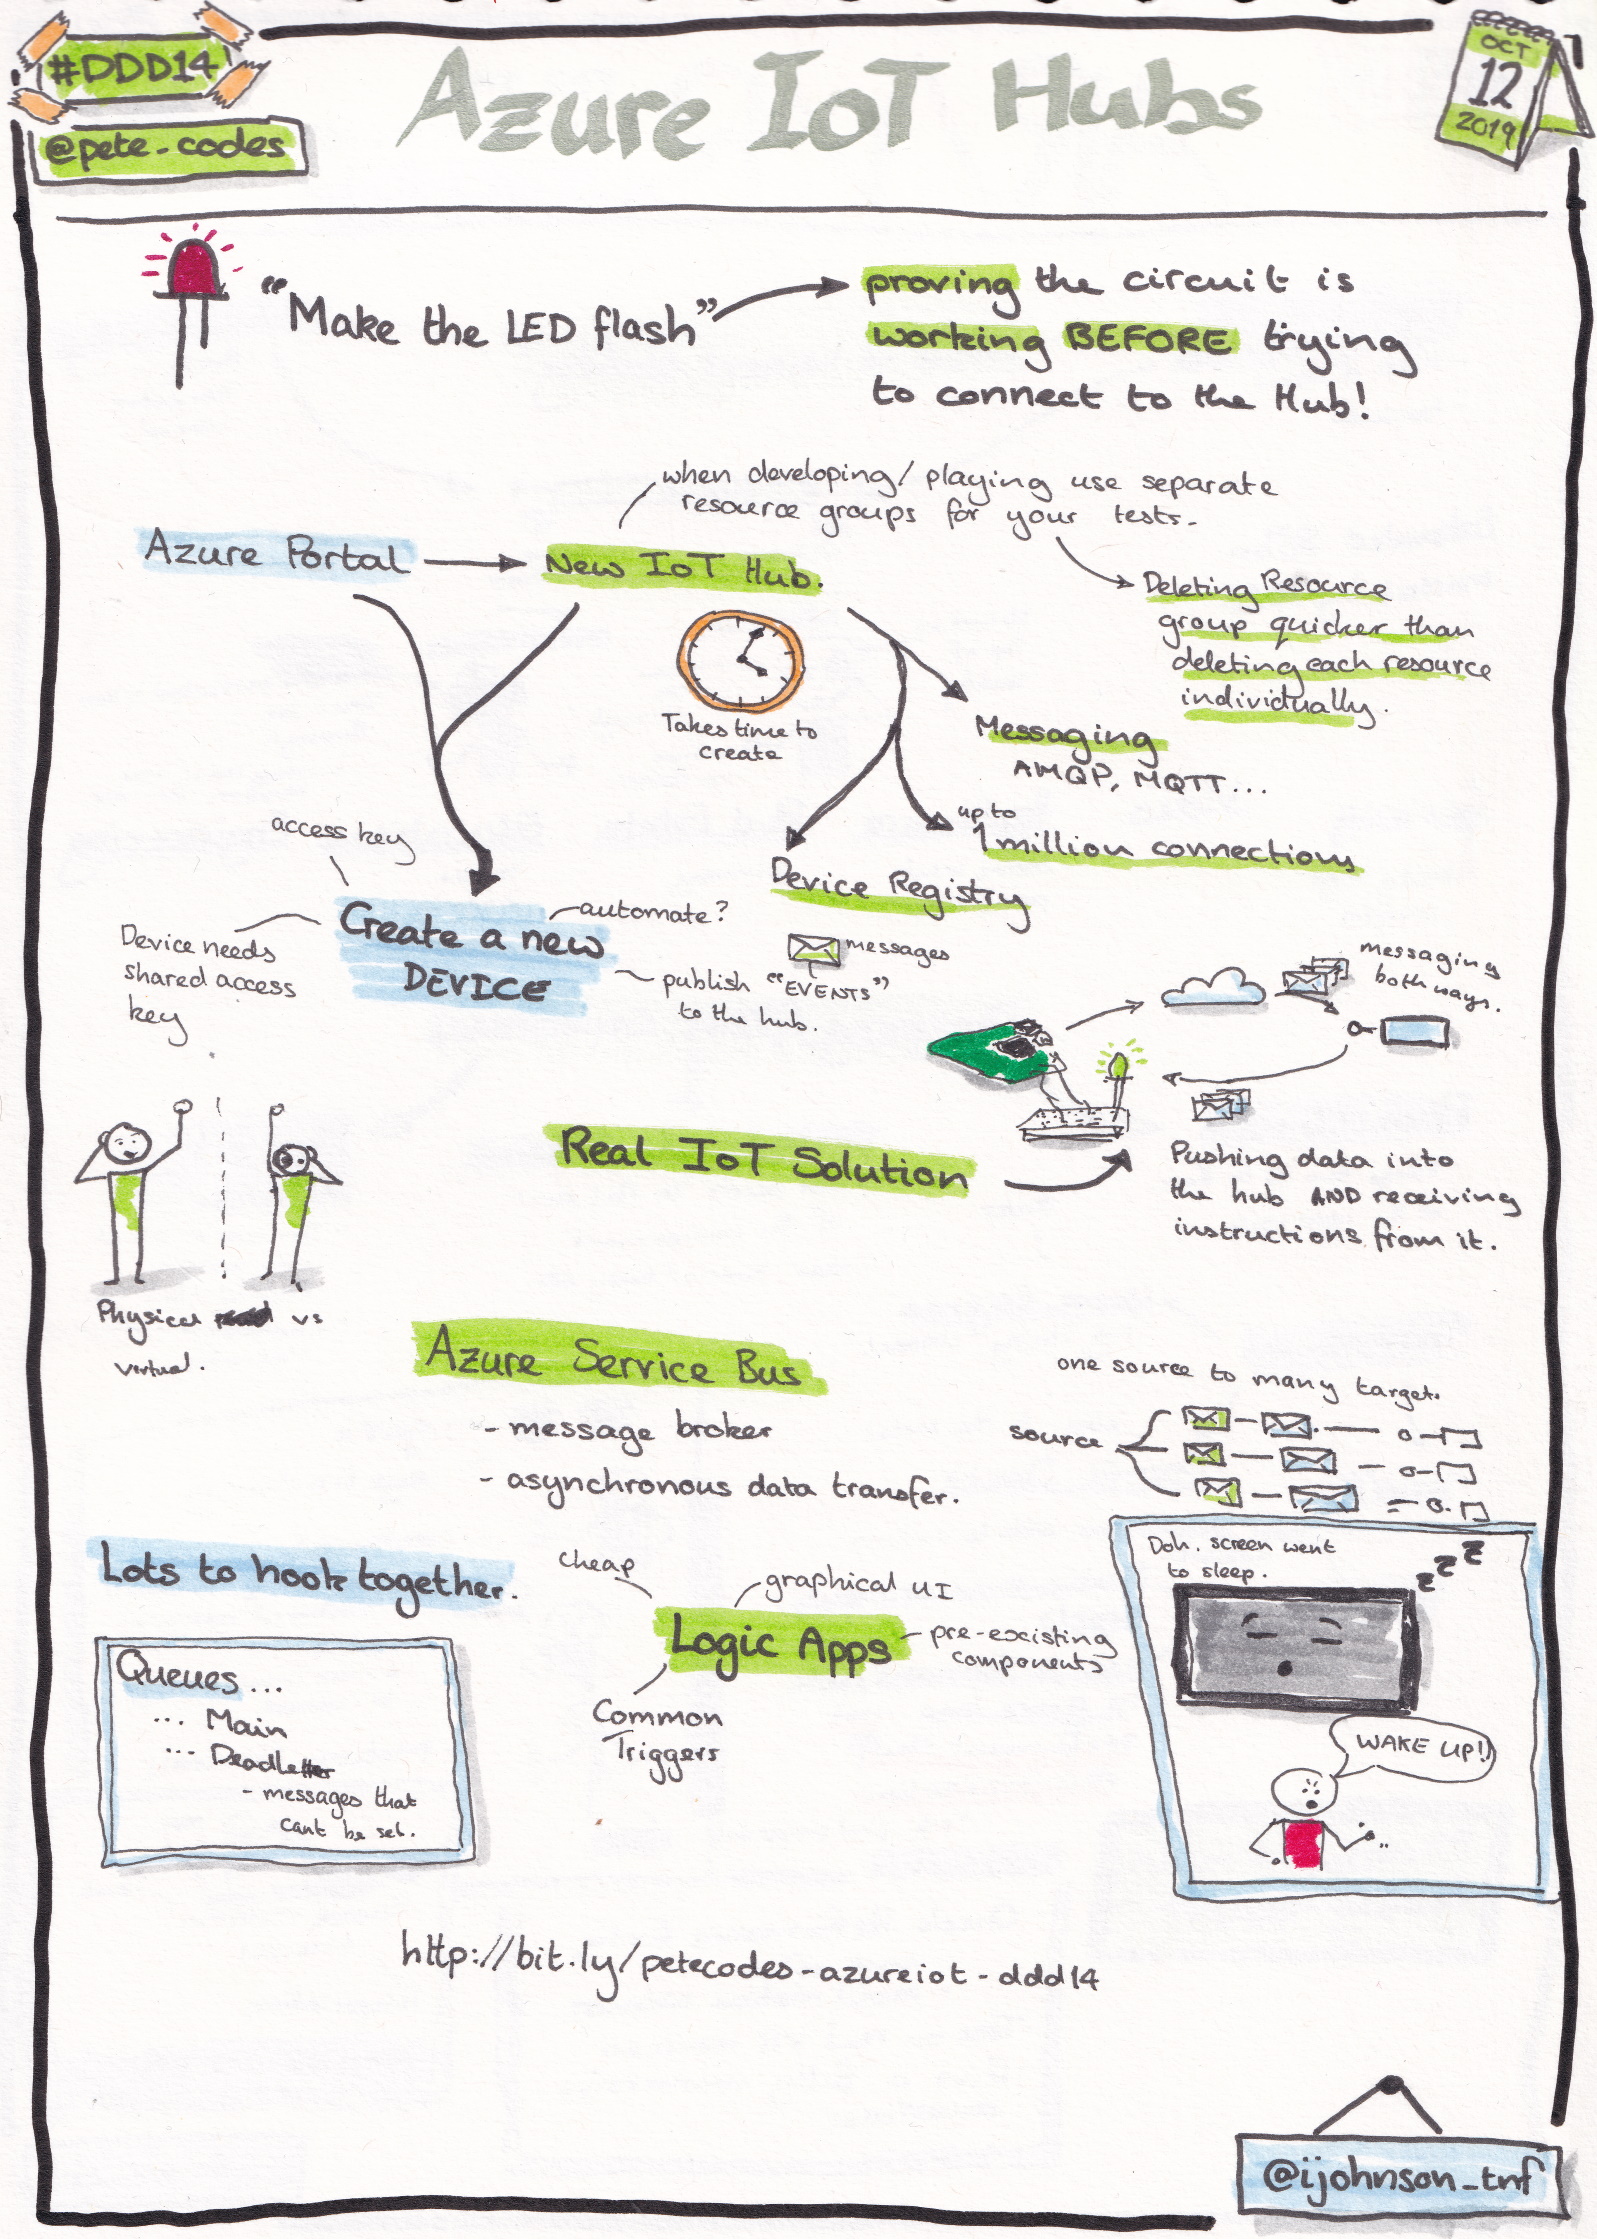 Sketchnotes from the talk 'Azure IoT Hubs' by Pete Gallagher